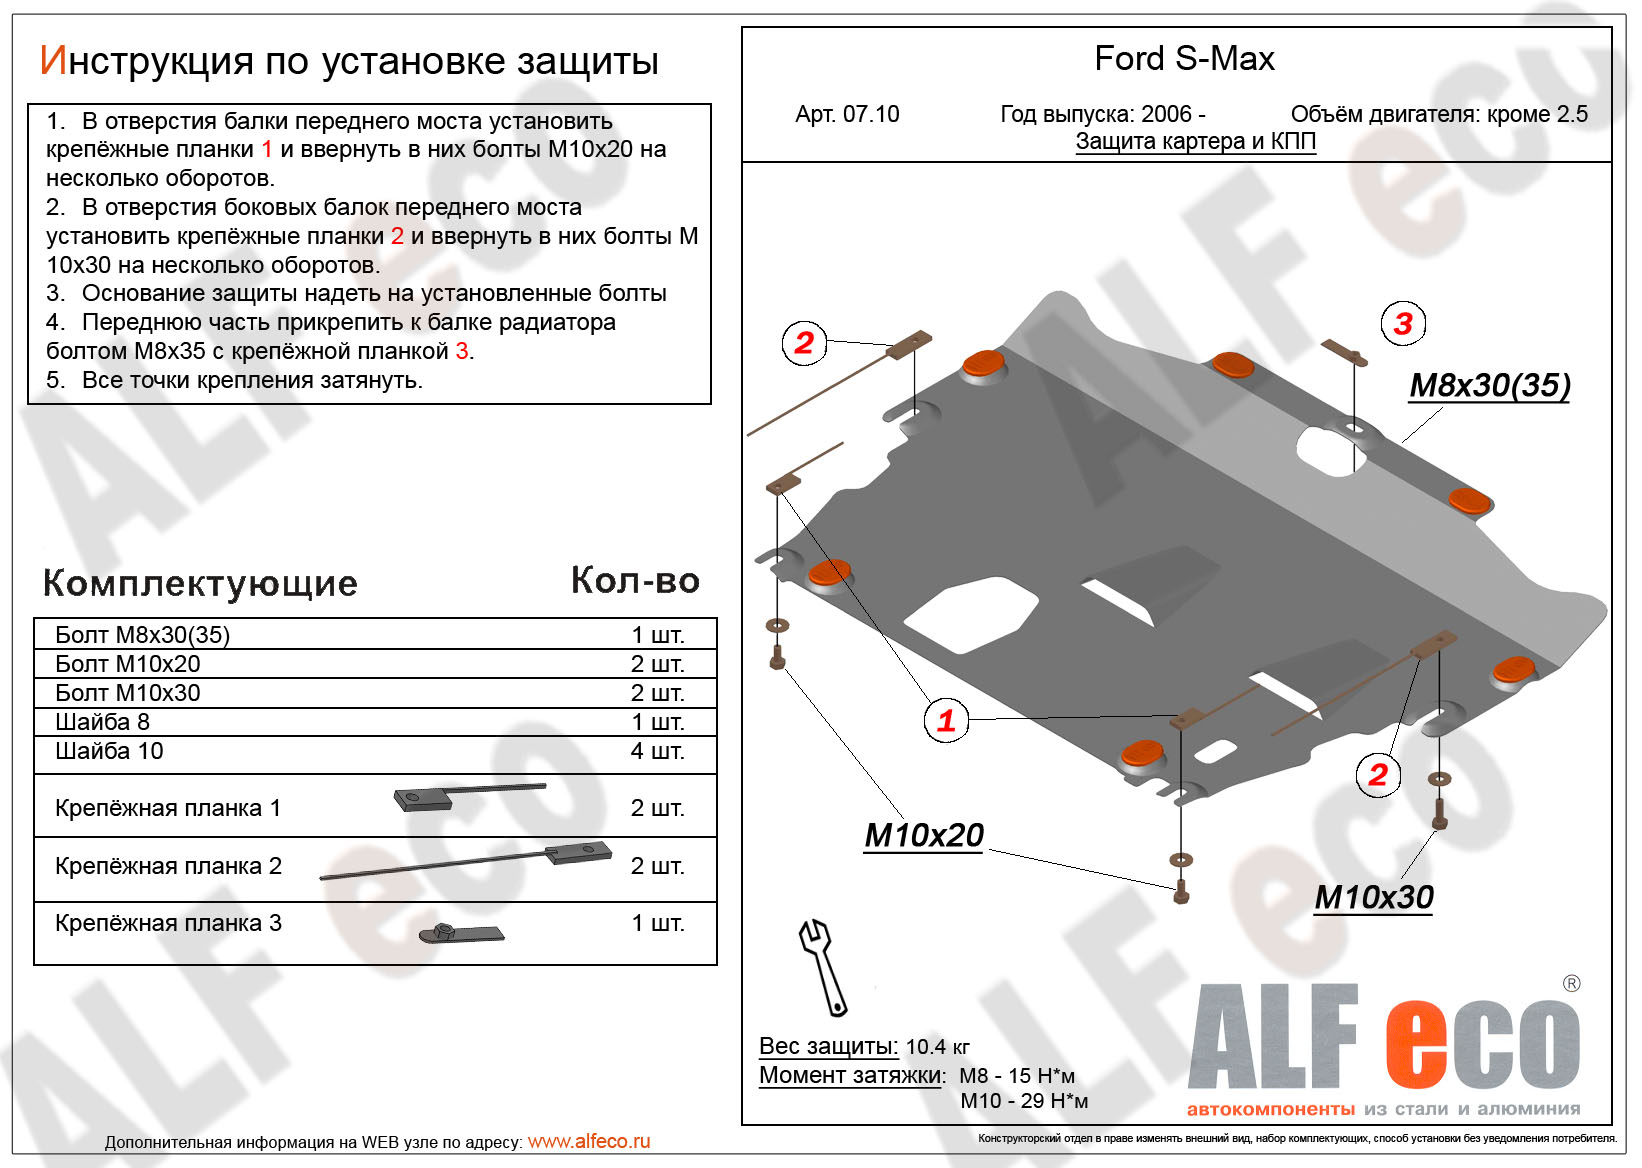 ,    Ford S-Max 2006 -
                